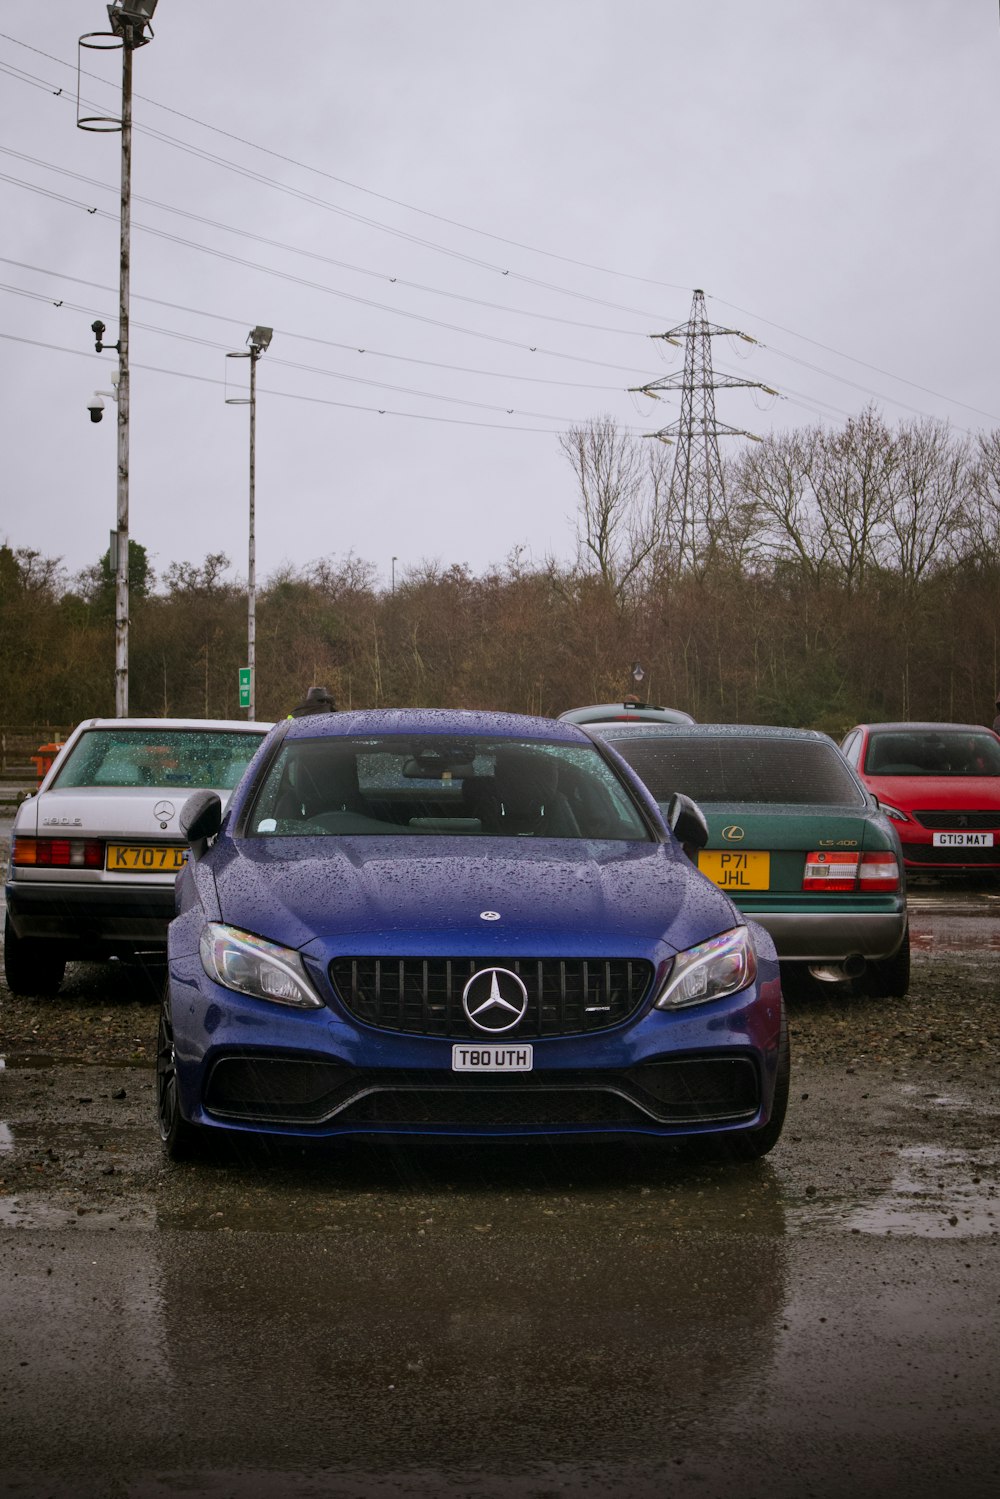 a group of cars parked in a parking lot